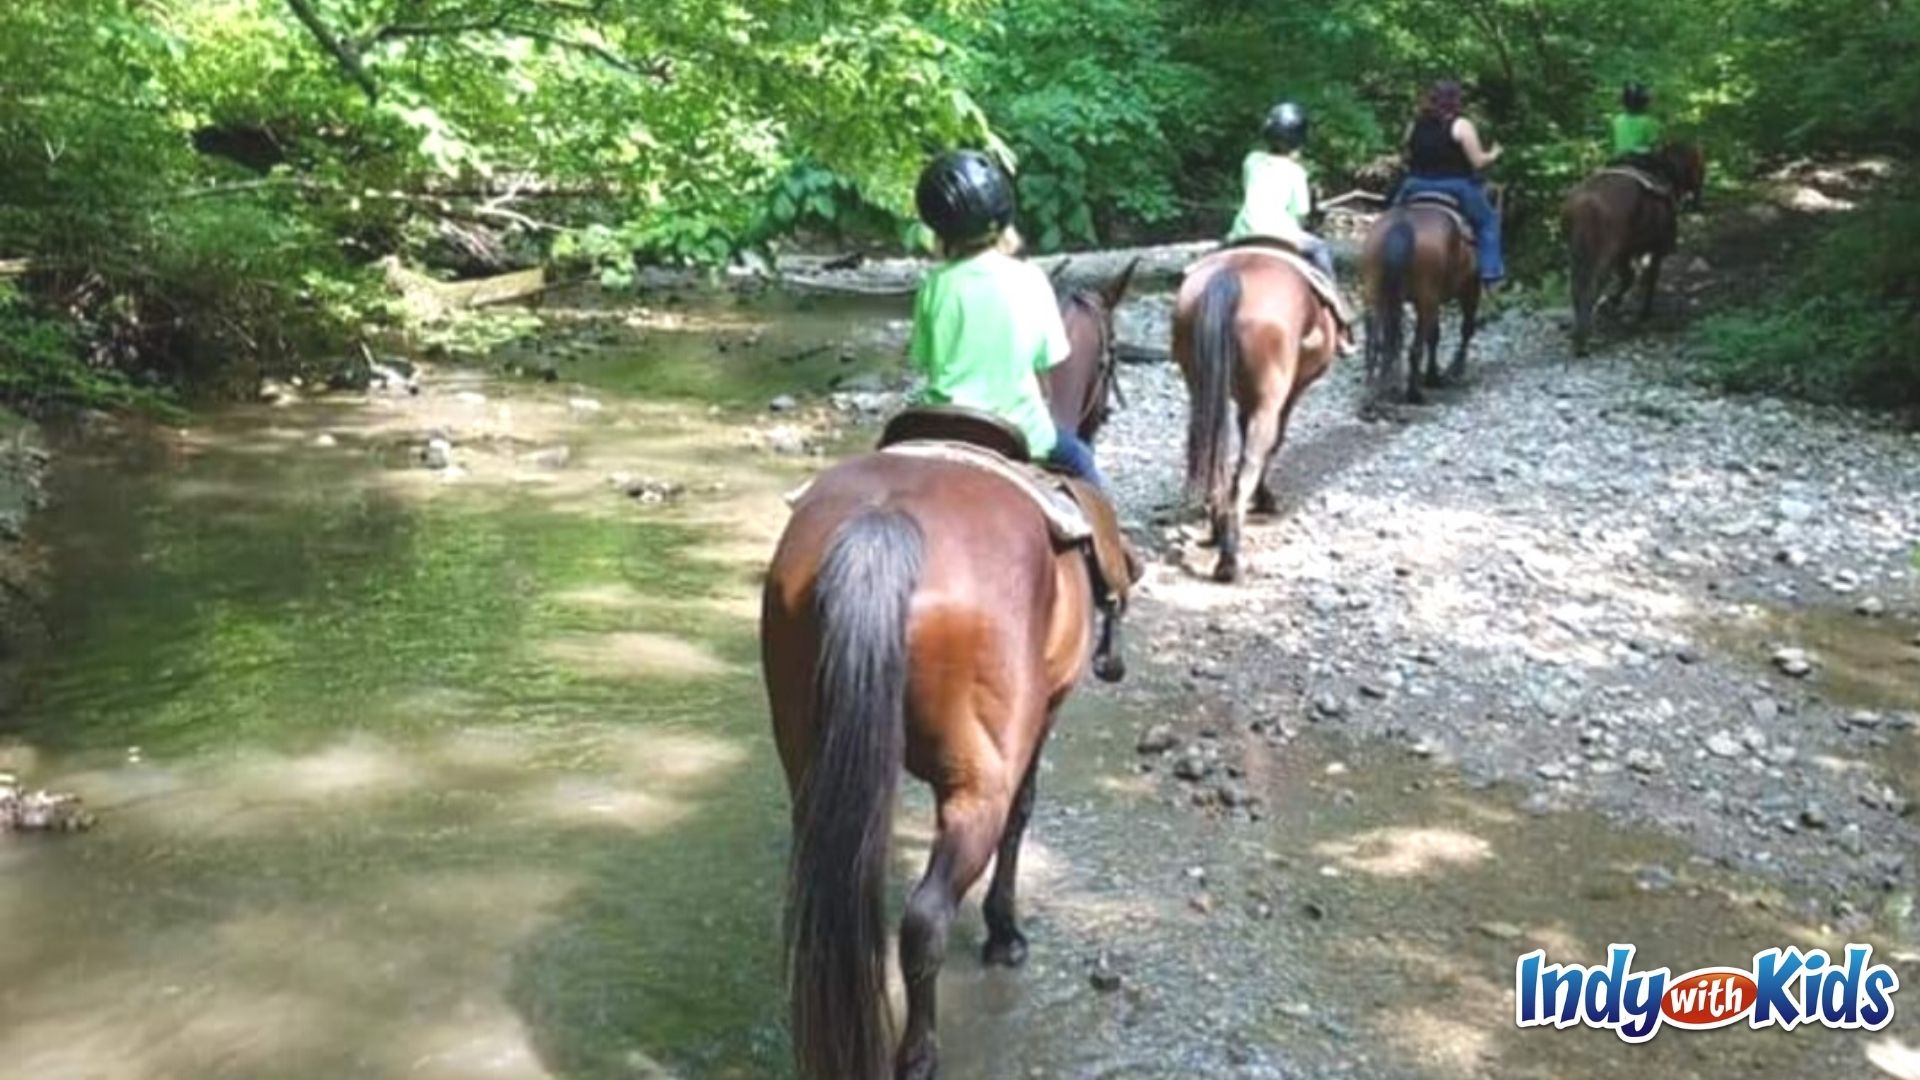 Horses and riders of all ages follow a wooded path through Fort Harrison State Park.